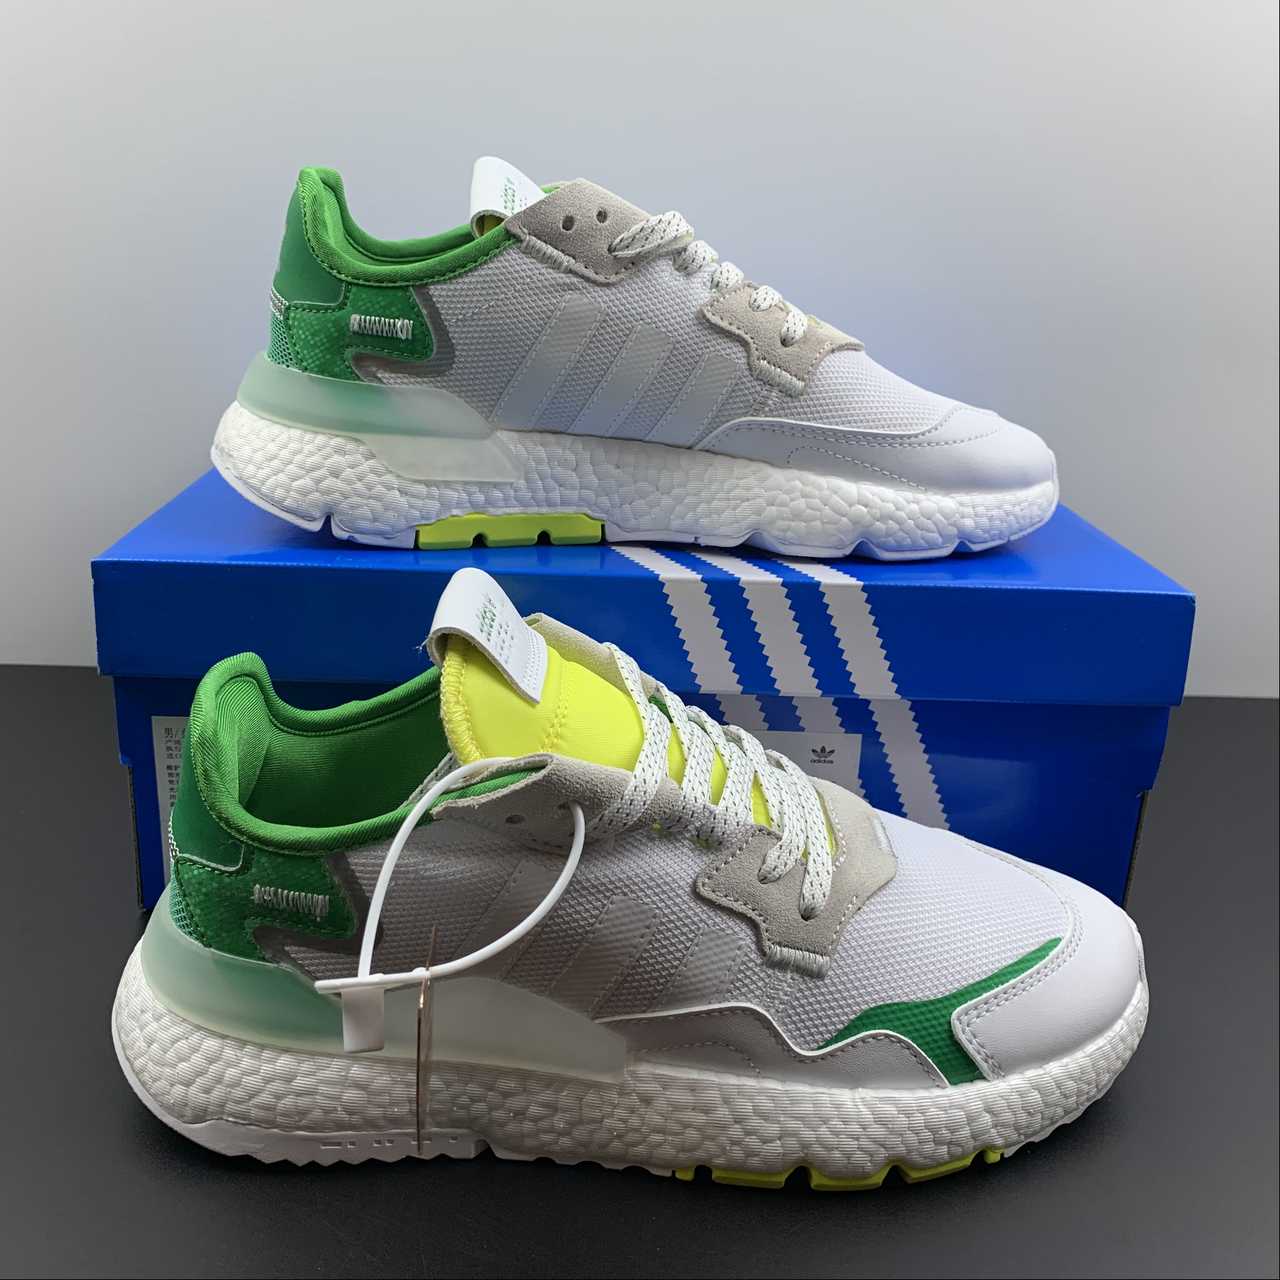 adidas daily 2.0 denim sneaker sandals boots sale